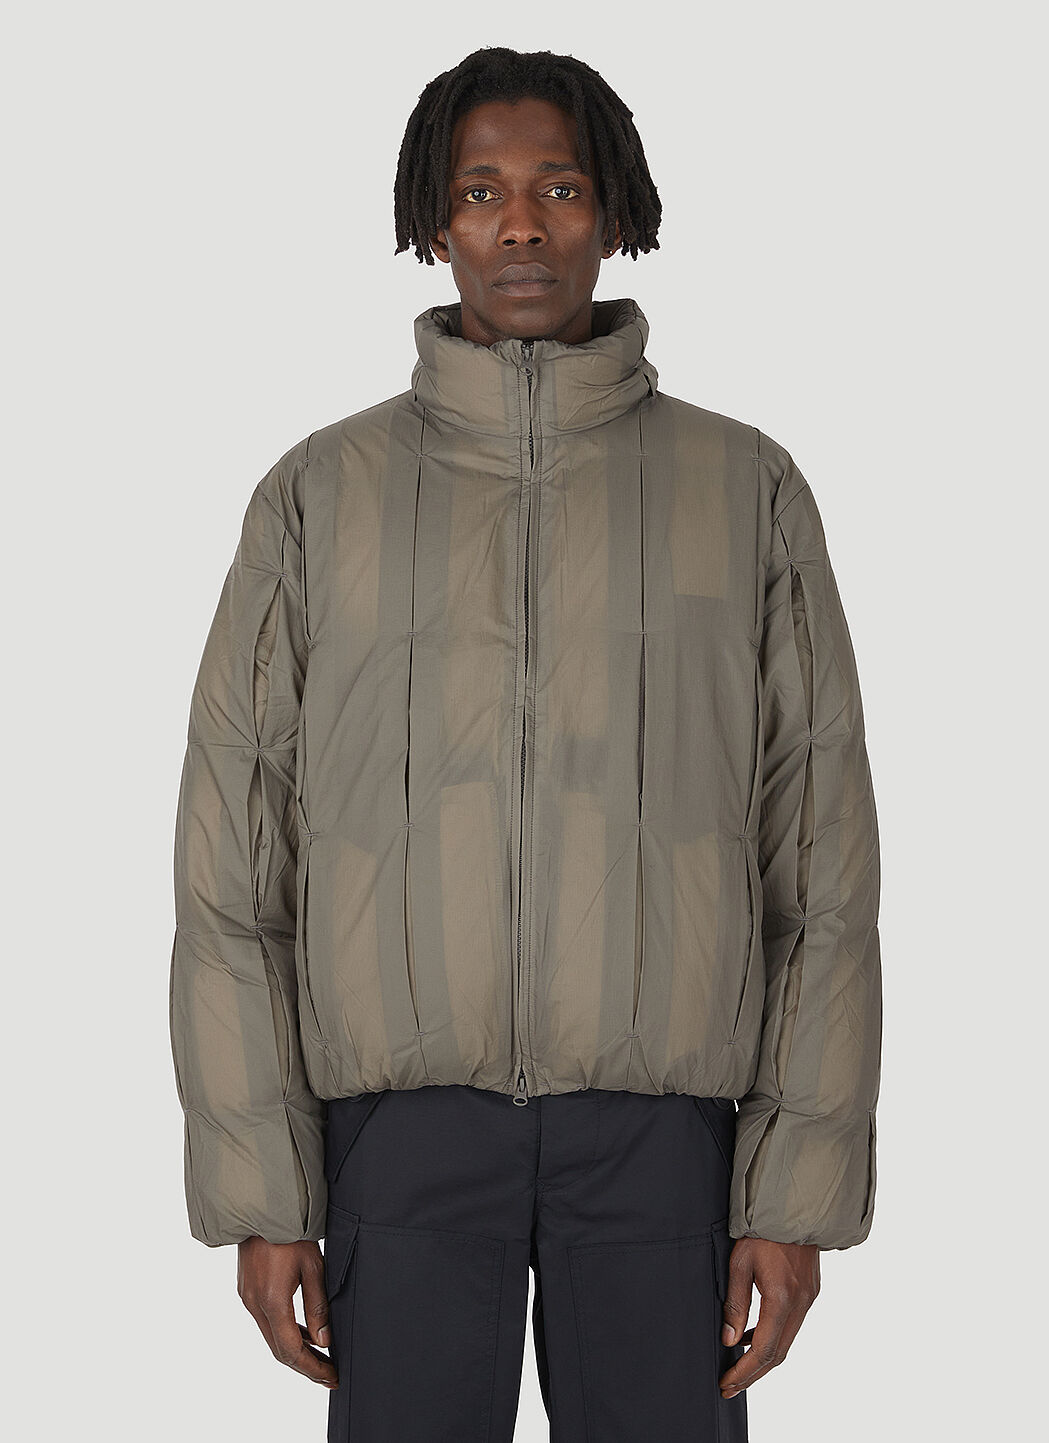 POST ARCHIVE FACTION (PAF) 4.0+ Down Centre Jacket in Brown | LN-CC®